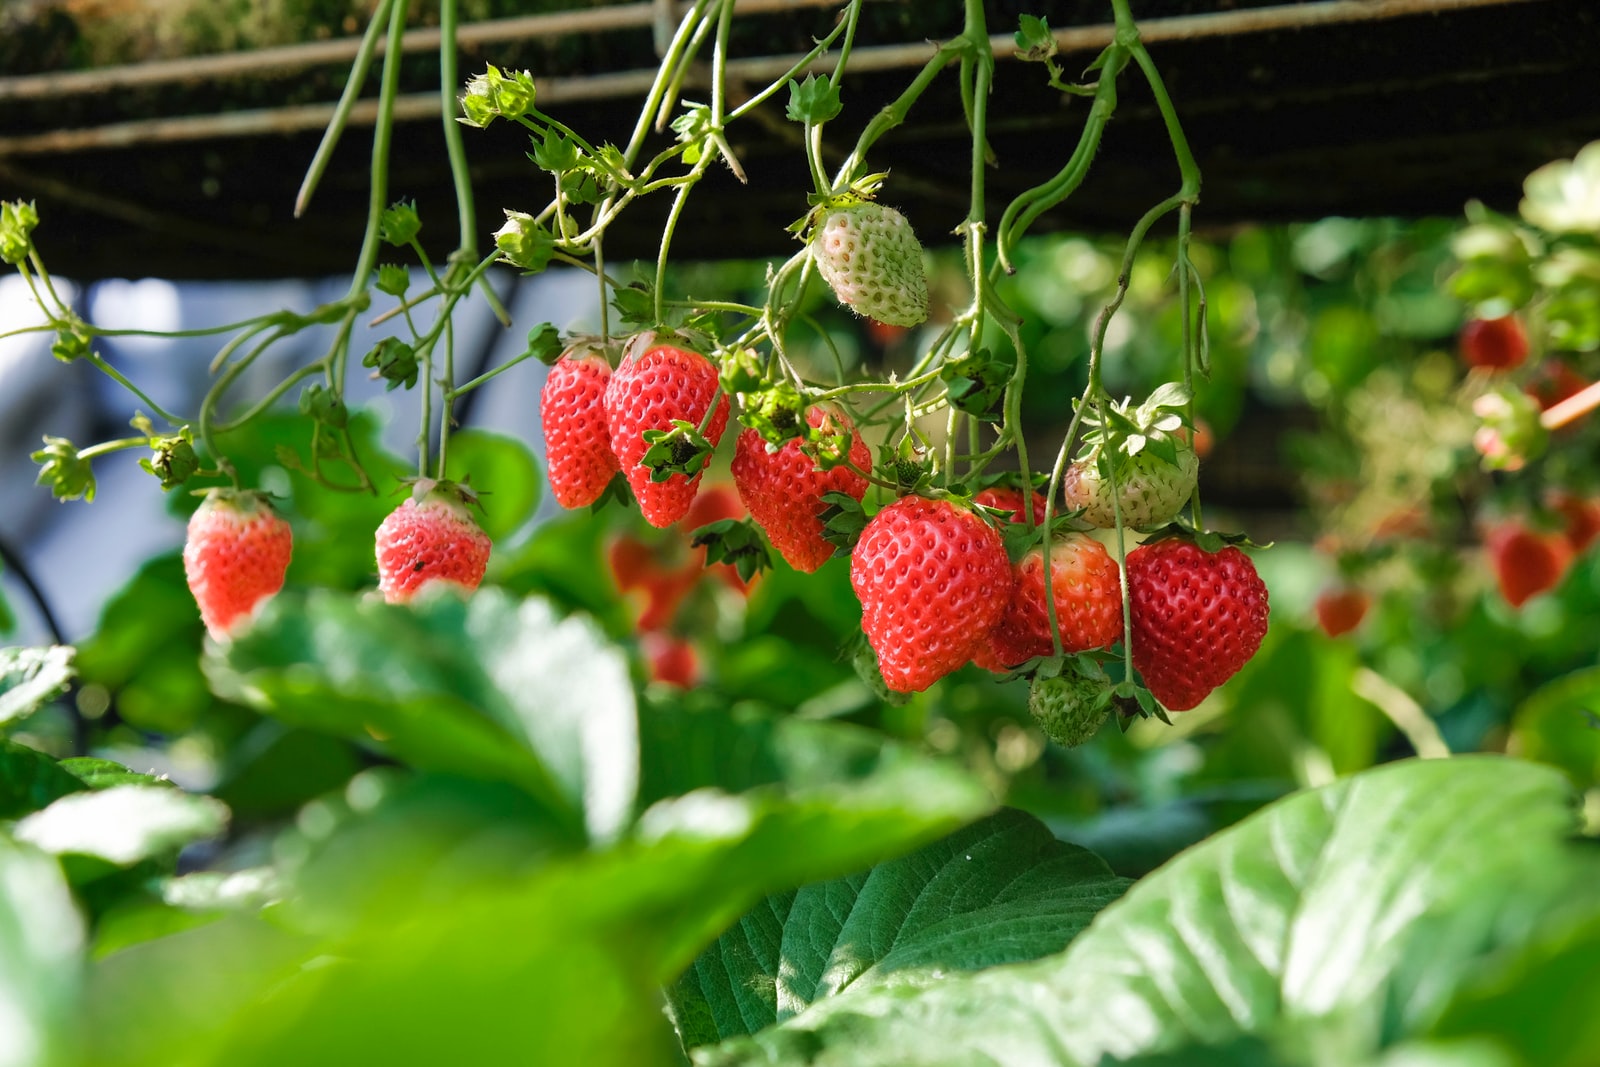 strawberries in shallow focus